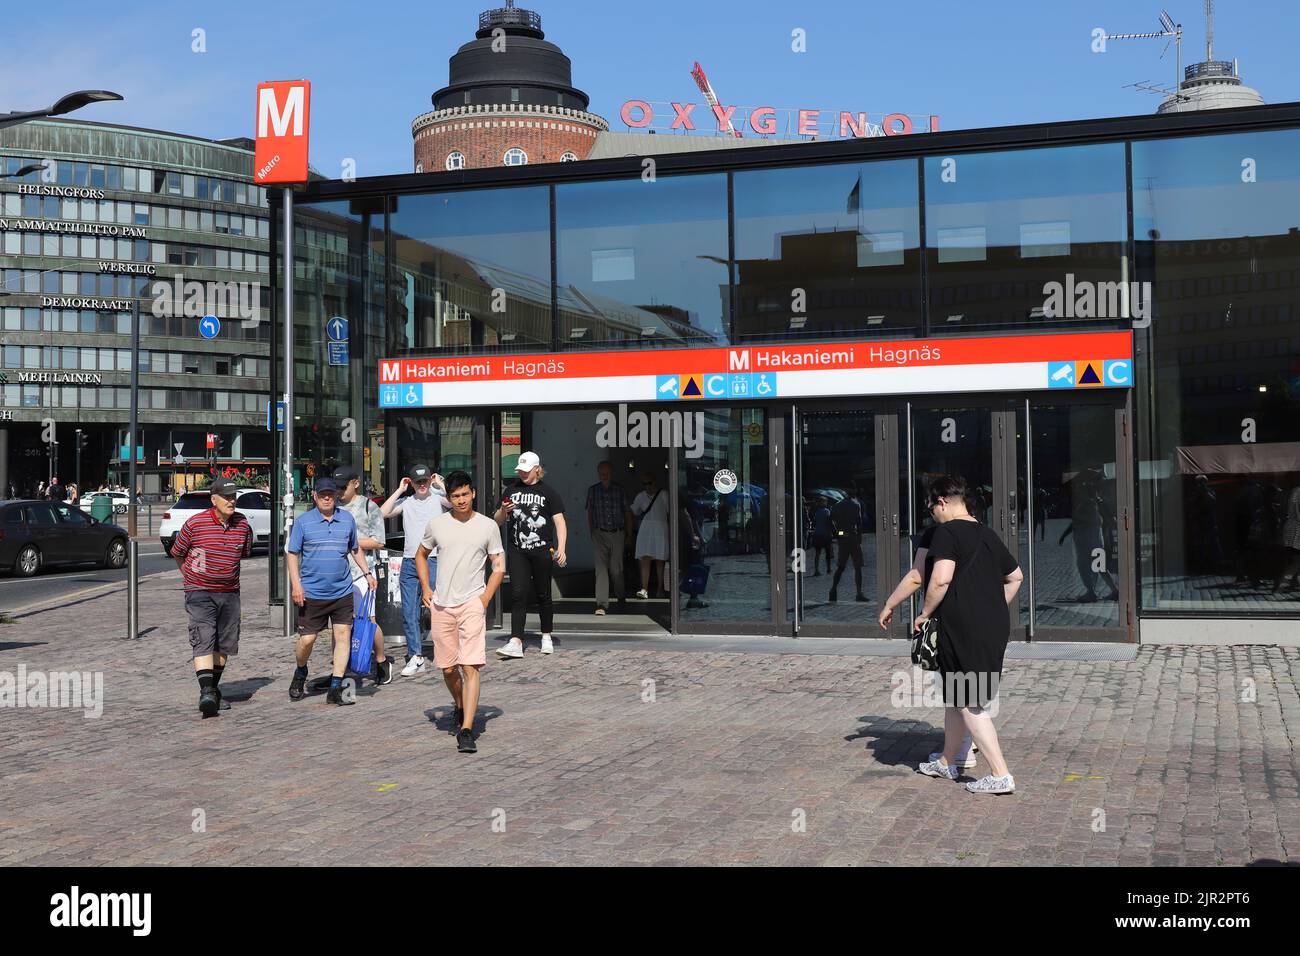 Helsinki, Finland - August 20, 2022: Exterior view of the Hakaniemi metro station entrance. Stock Photo